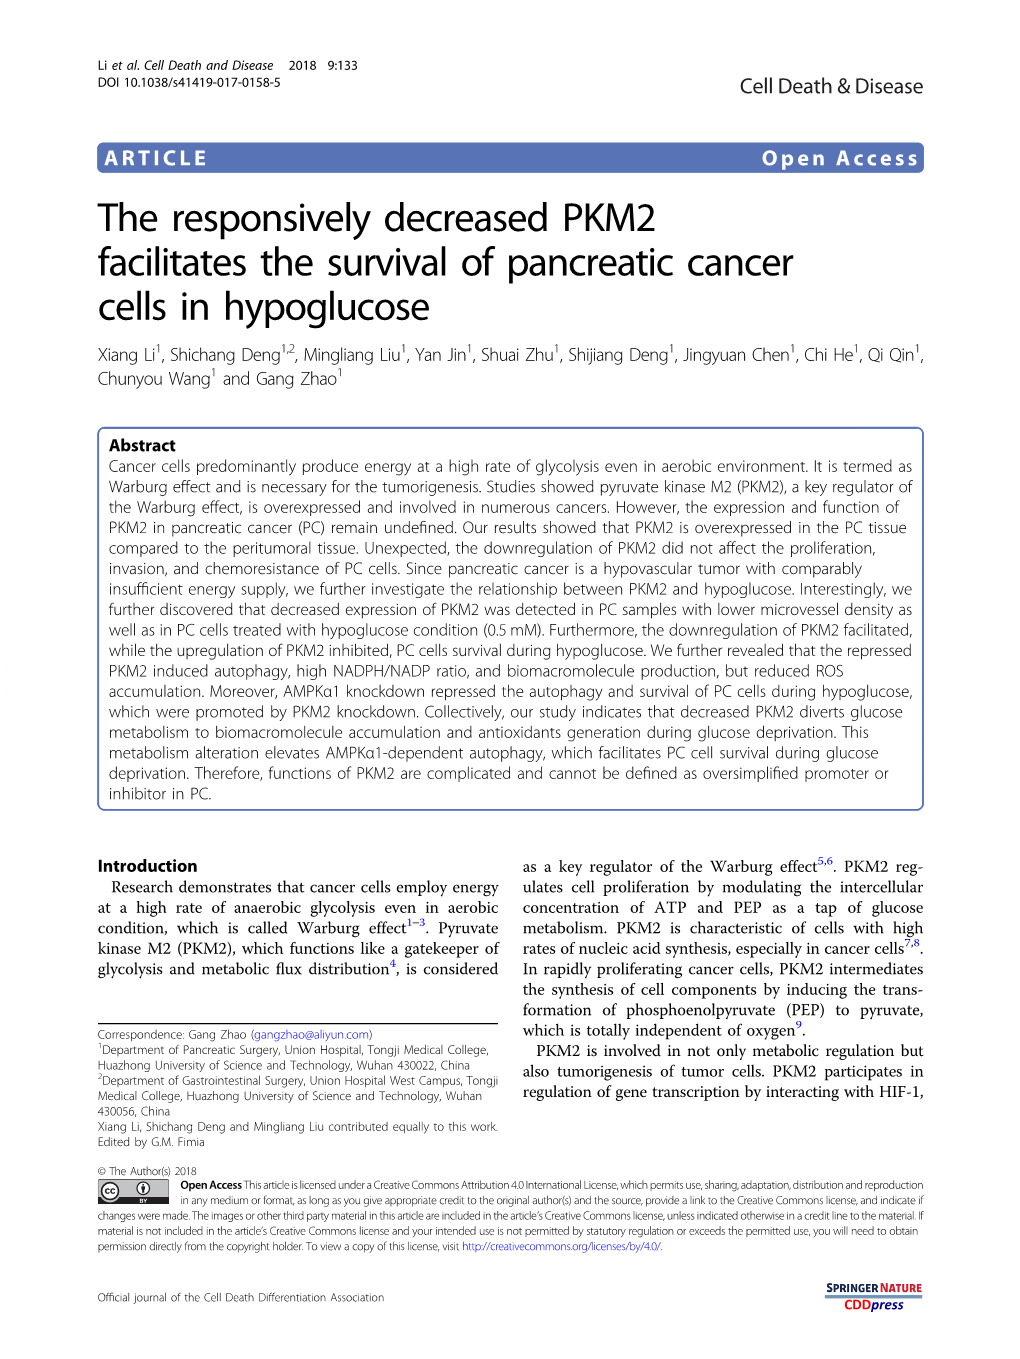 The Responsively Decreased PKM2 Facilitates the Survival of Pancreatic